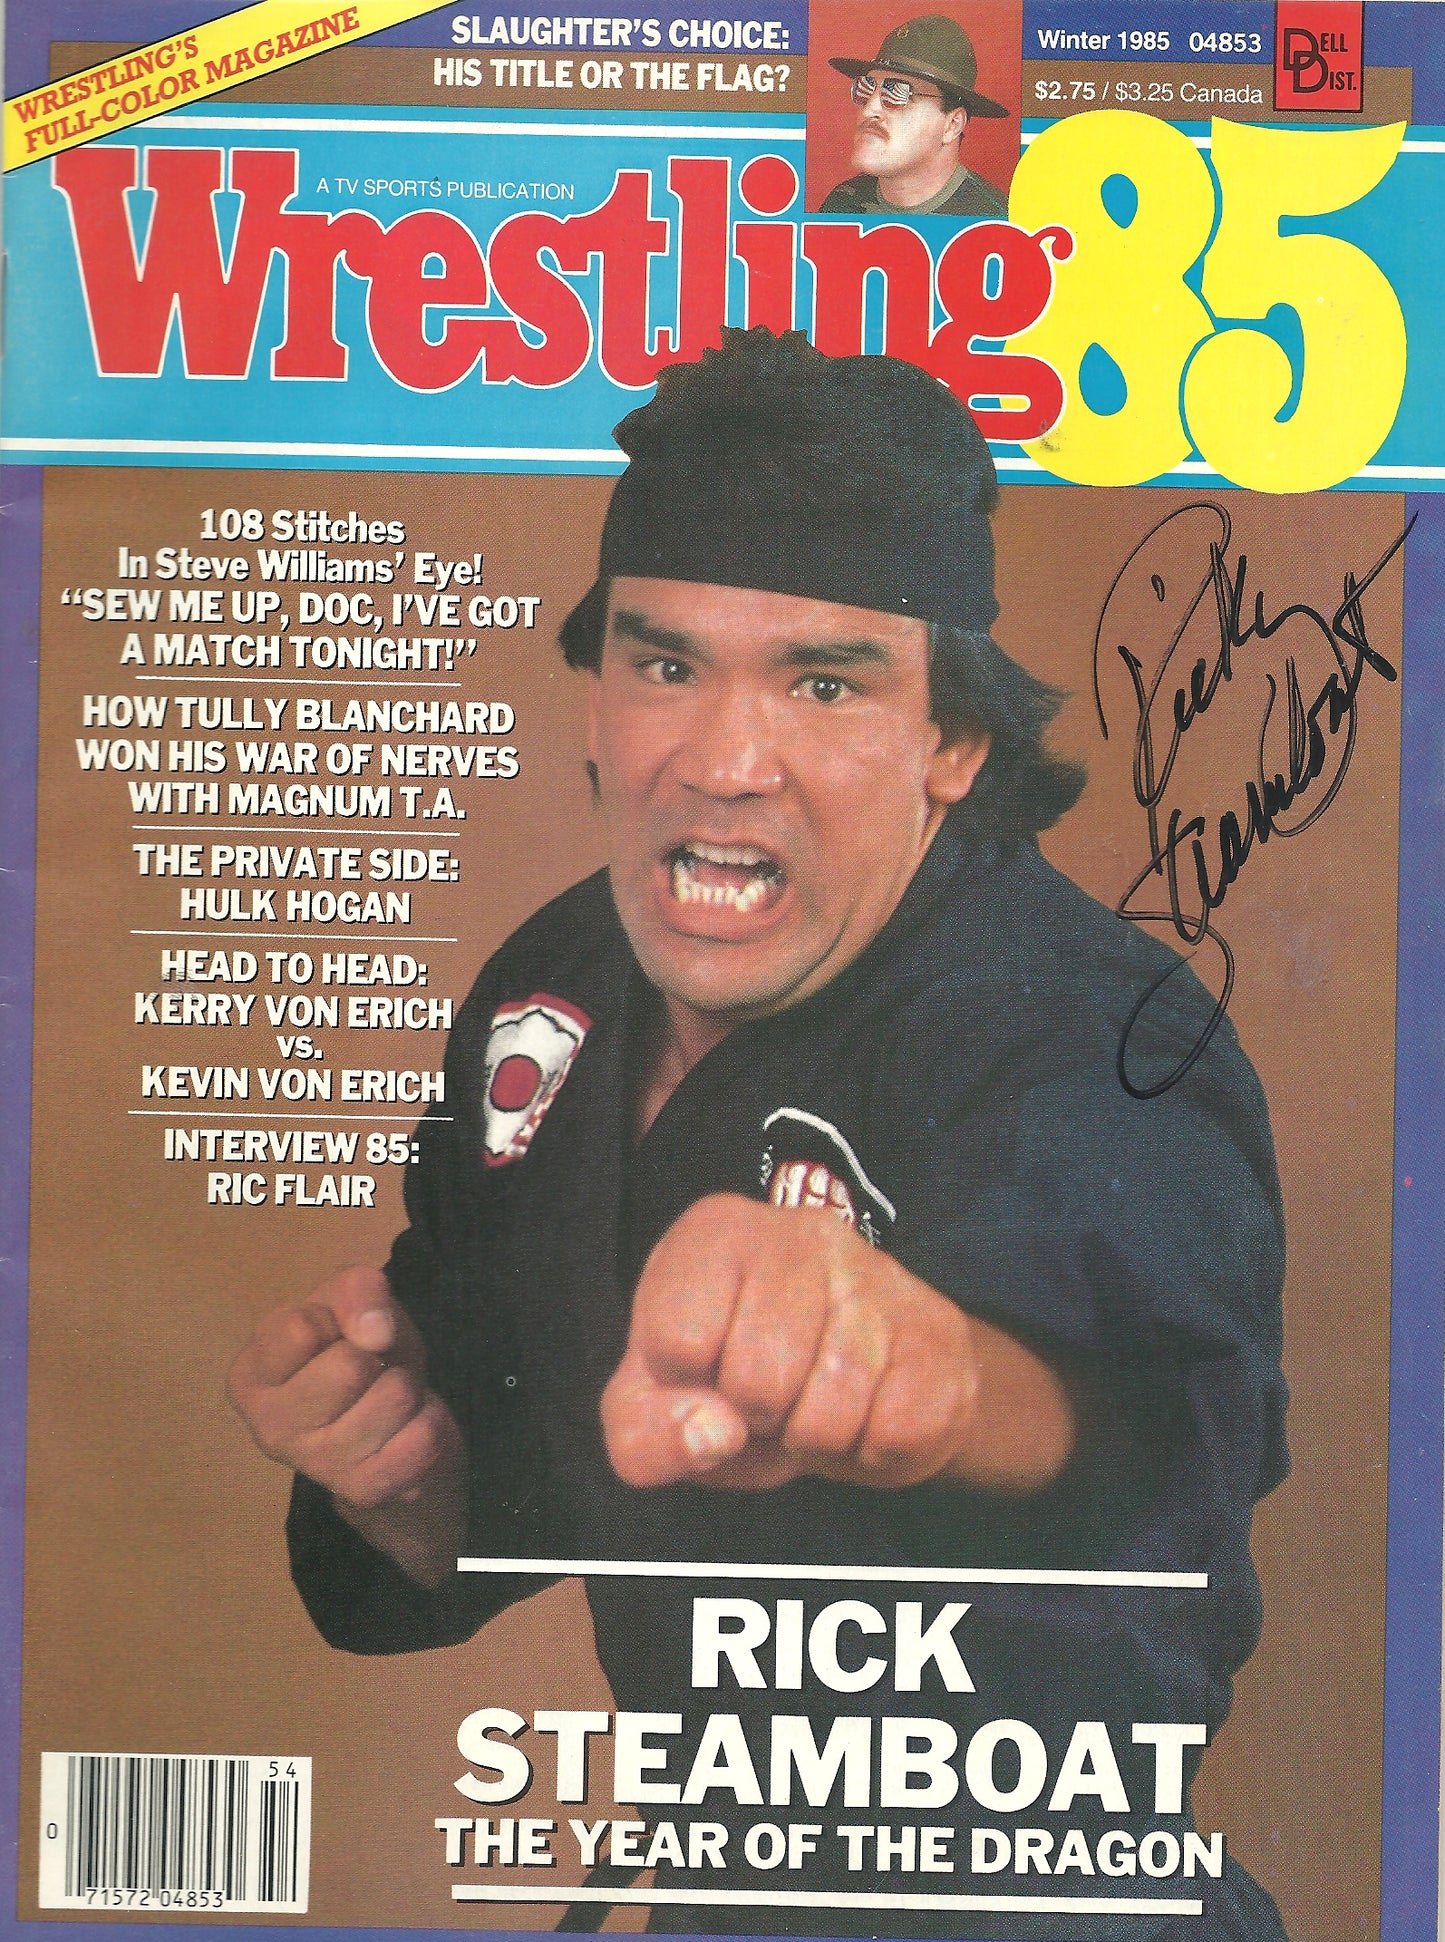 AM260  Ricky the Dragon Steamboat  Autographed vintage Wrestling Magazine  w/COA